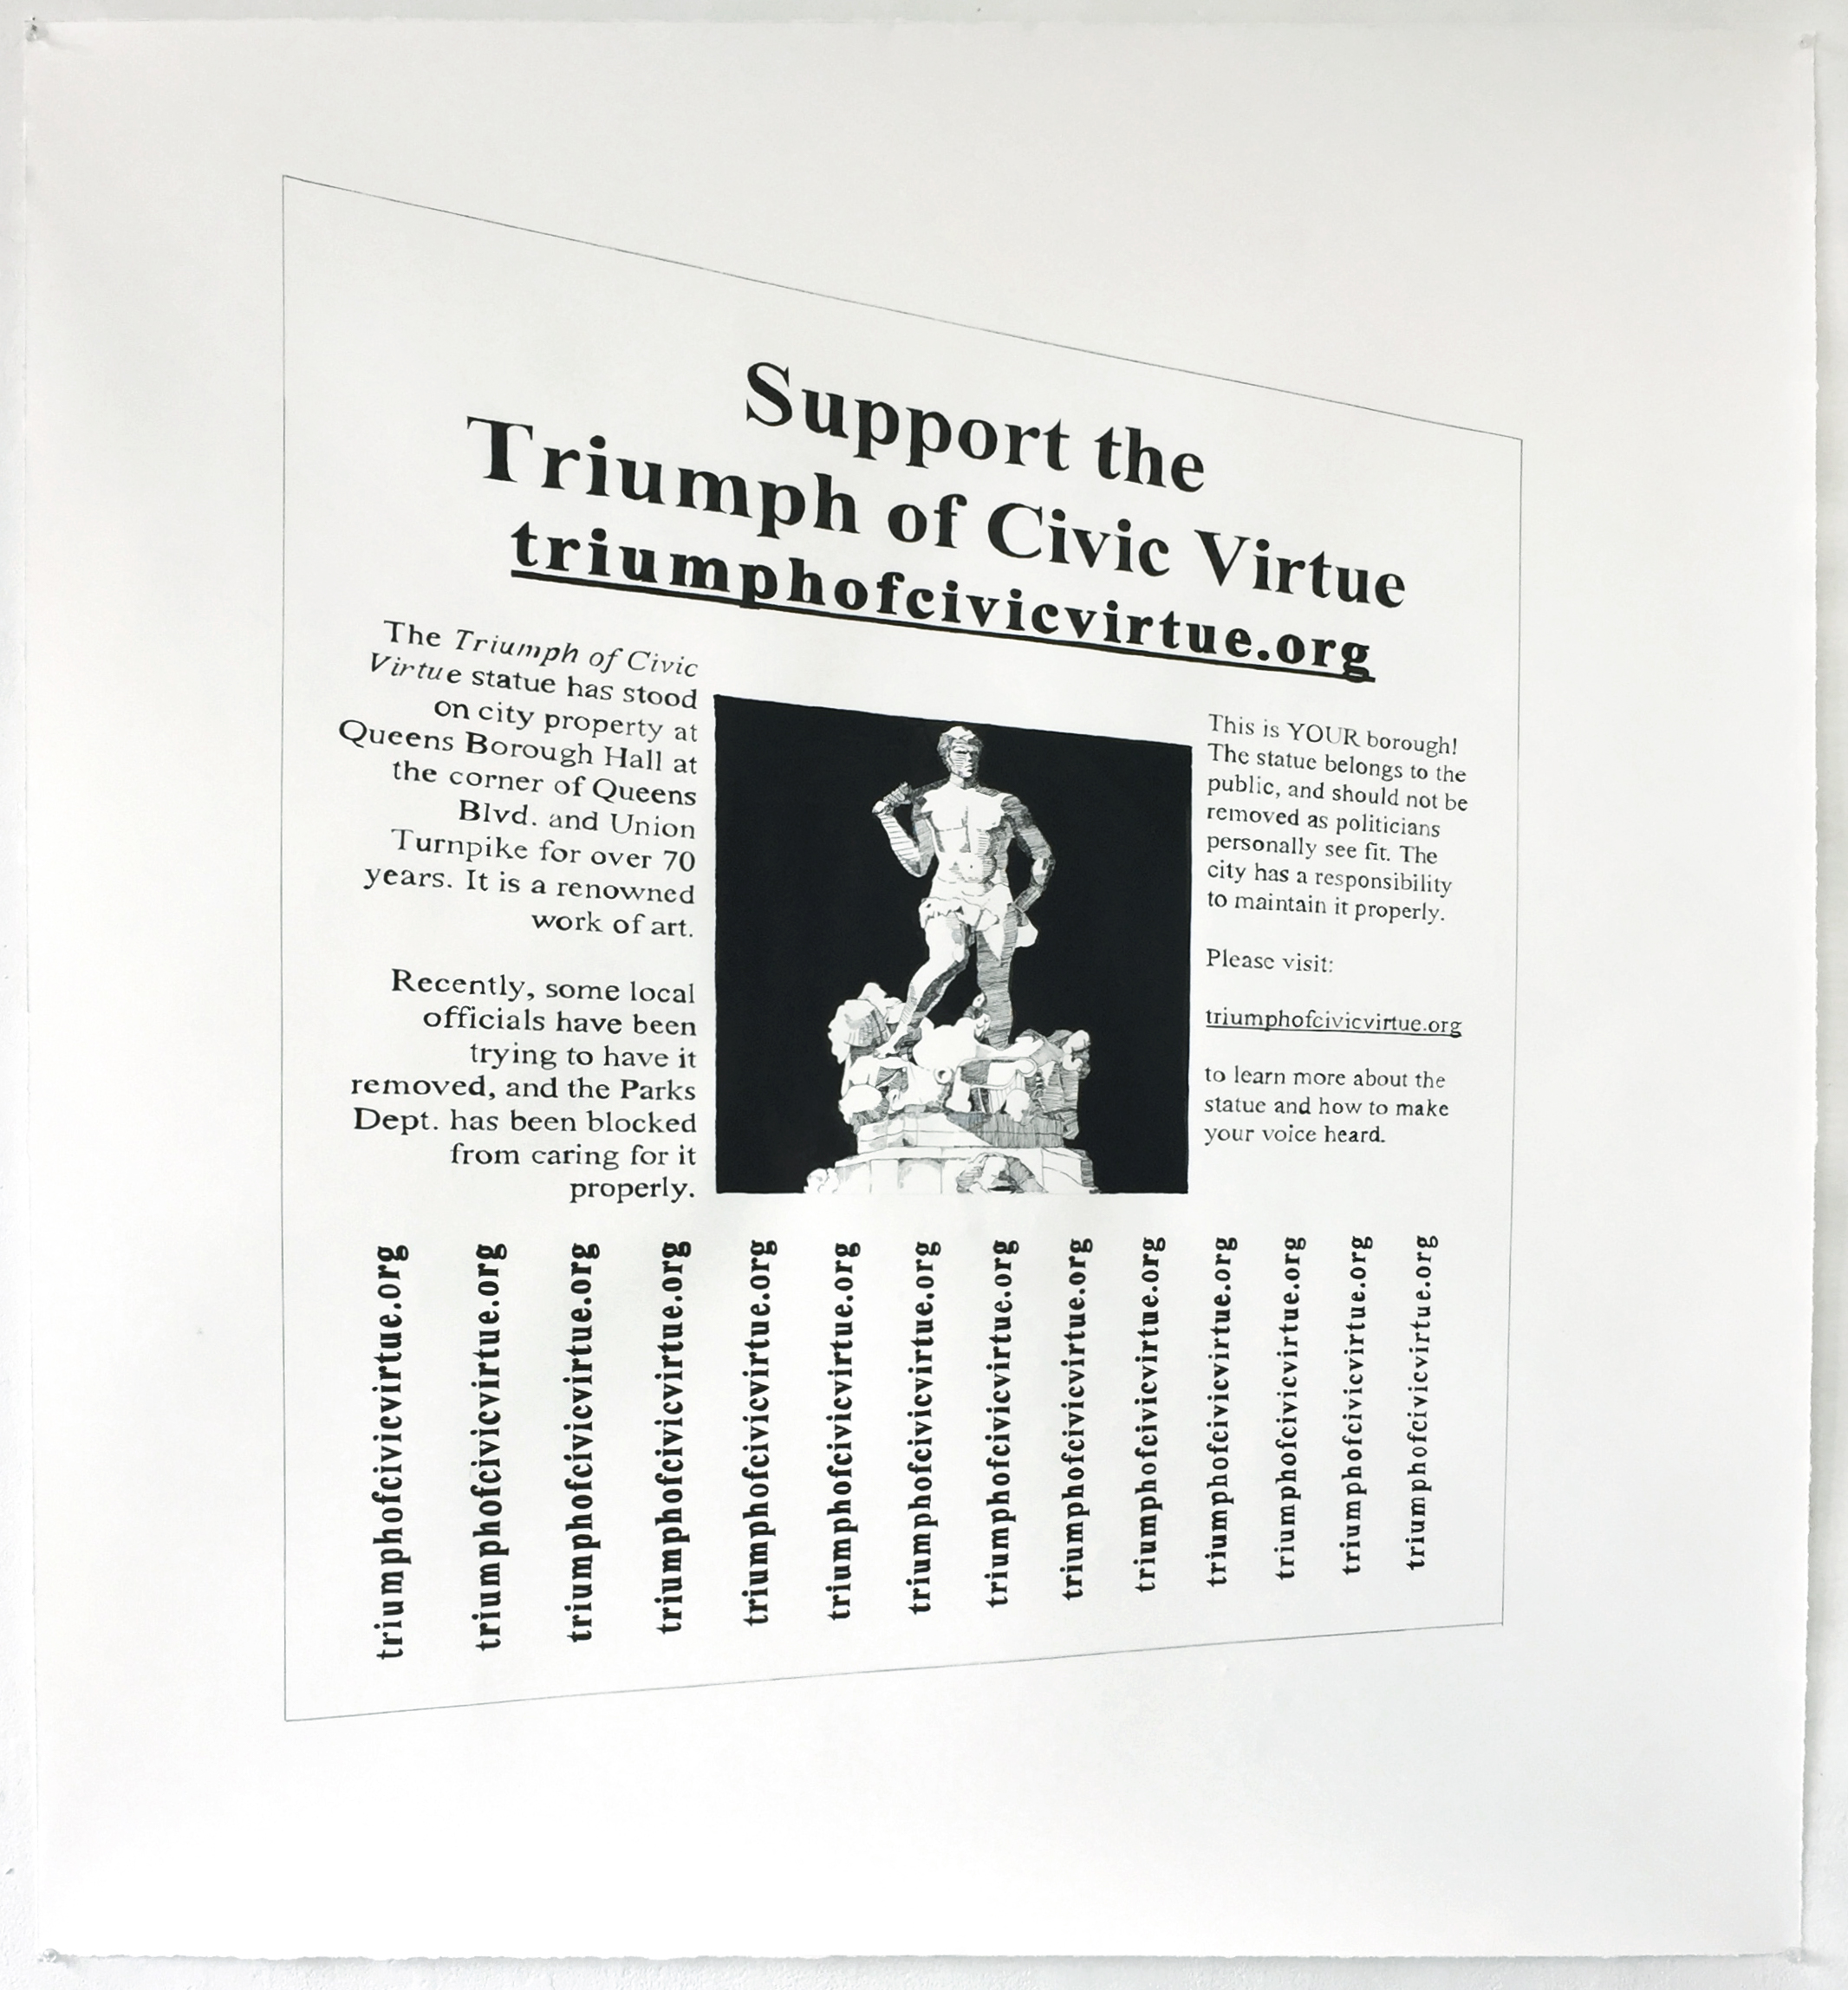 Campaign Poster (Triumph of Civic Virtue Candidate)